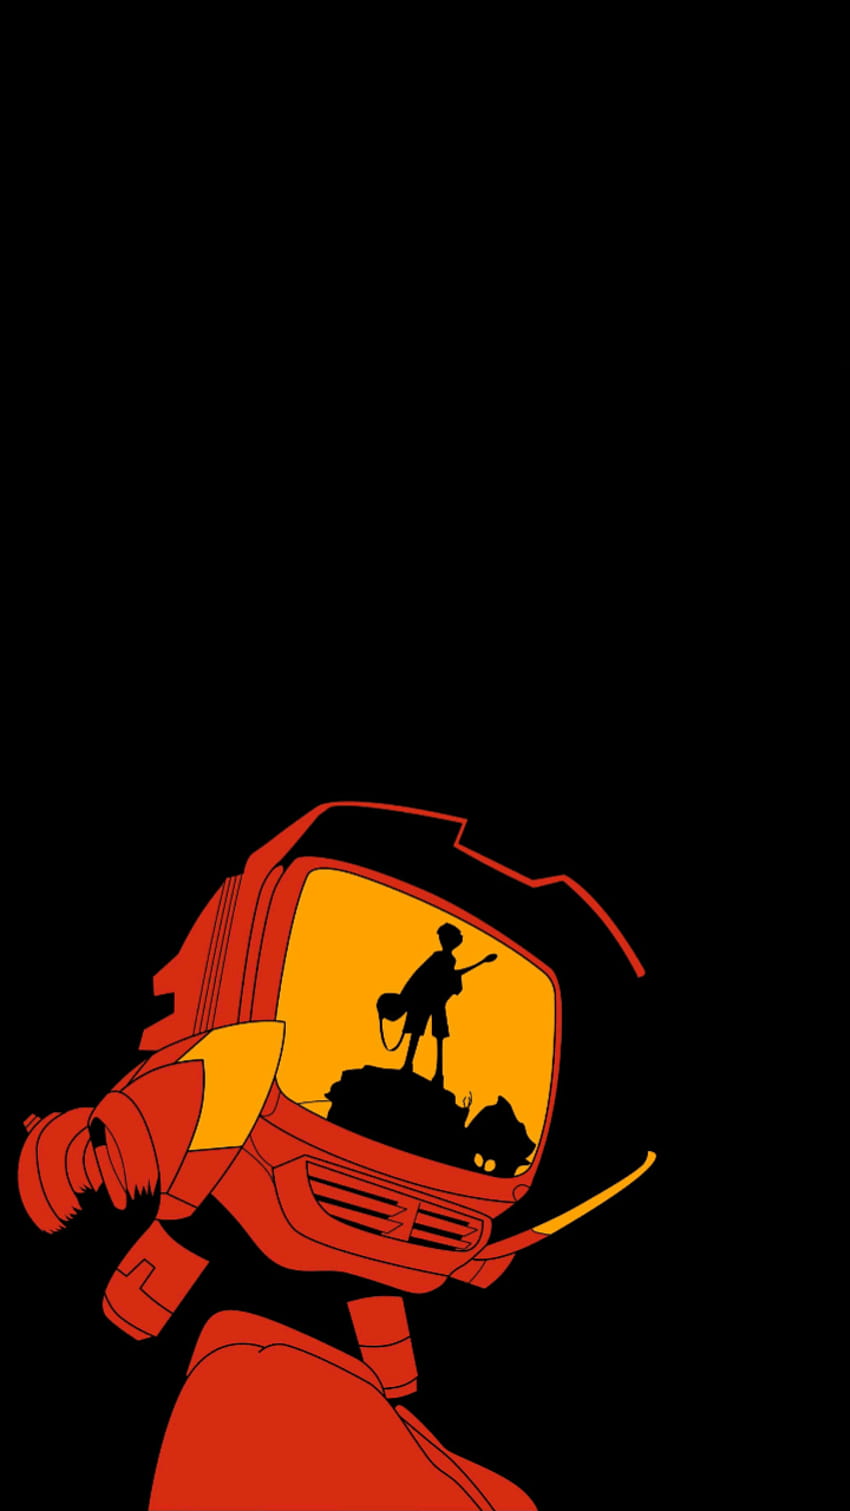 Just finished FLCL and loved it, made a after all the, flcl phone HD phone wallpaper